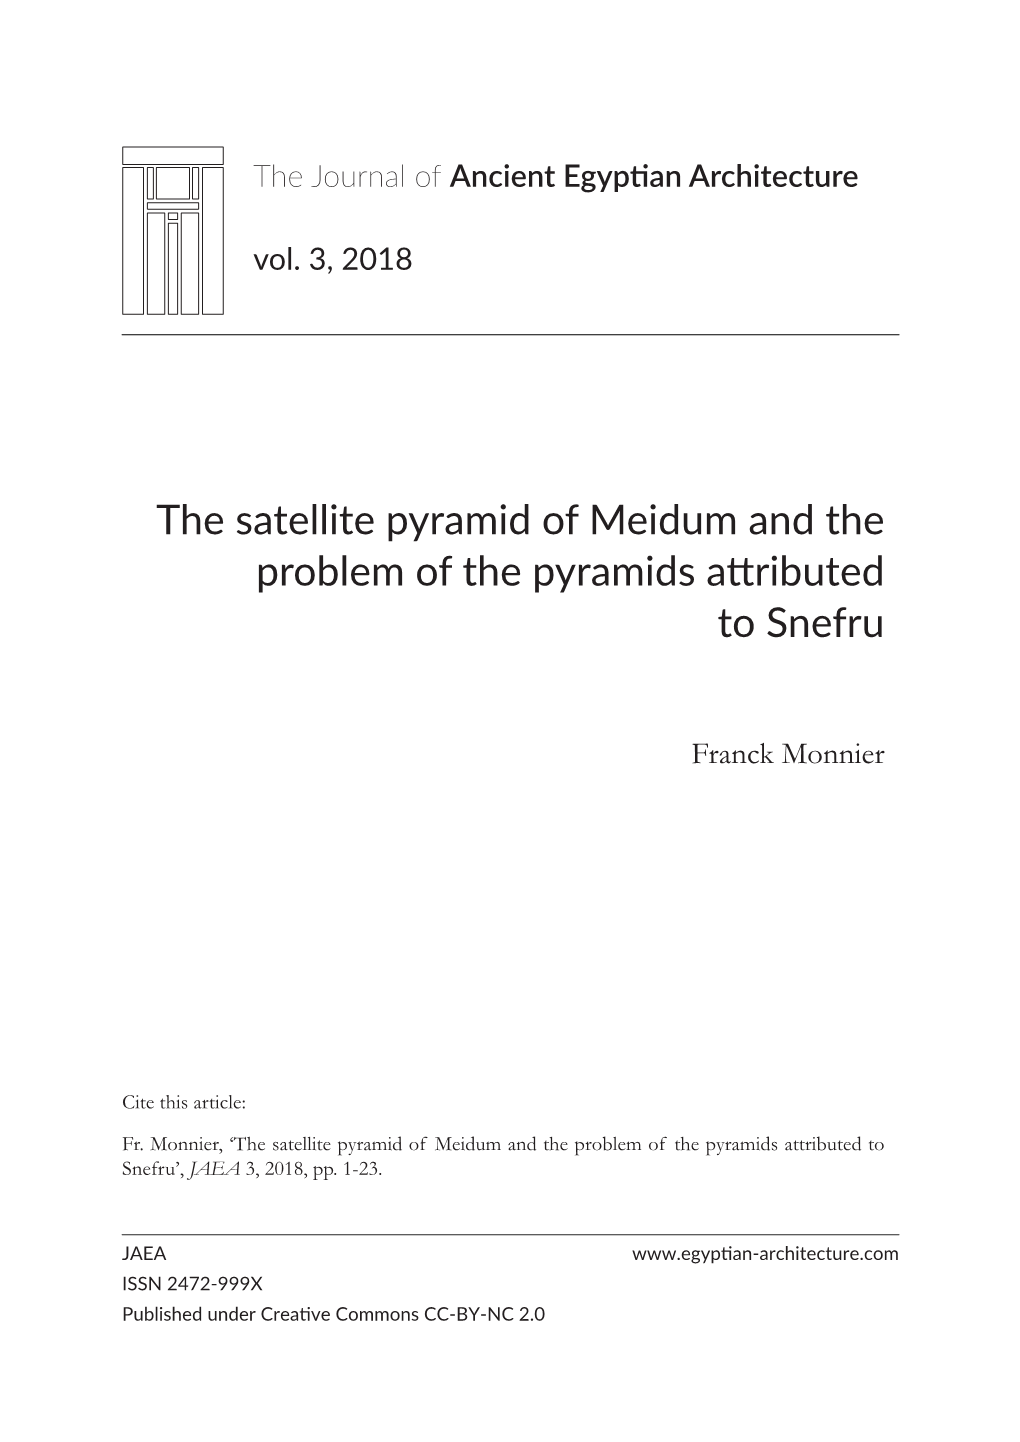 The Satellite Pyramid of Meidum and the Problem of the Pyramids Attributed to Snefru